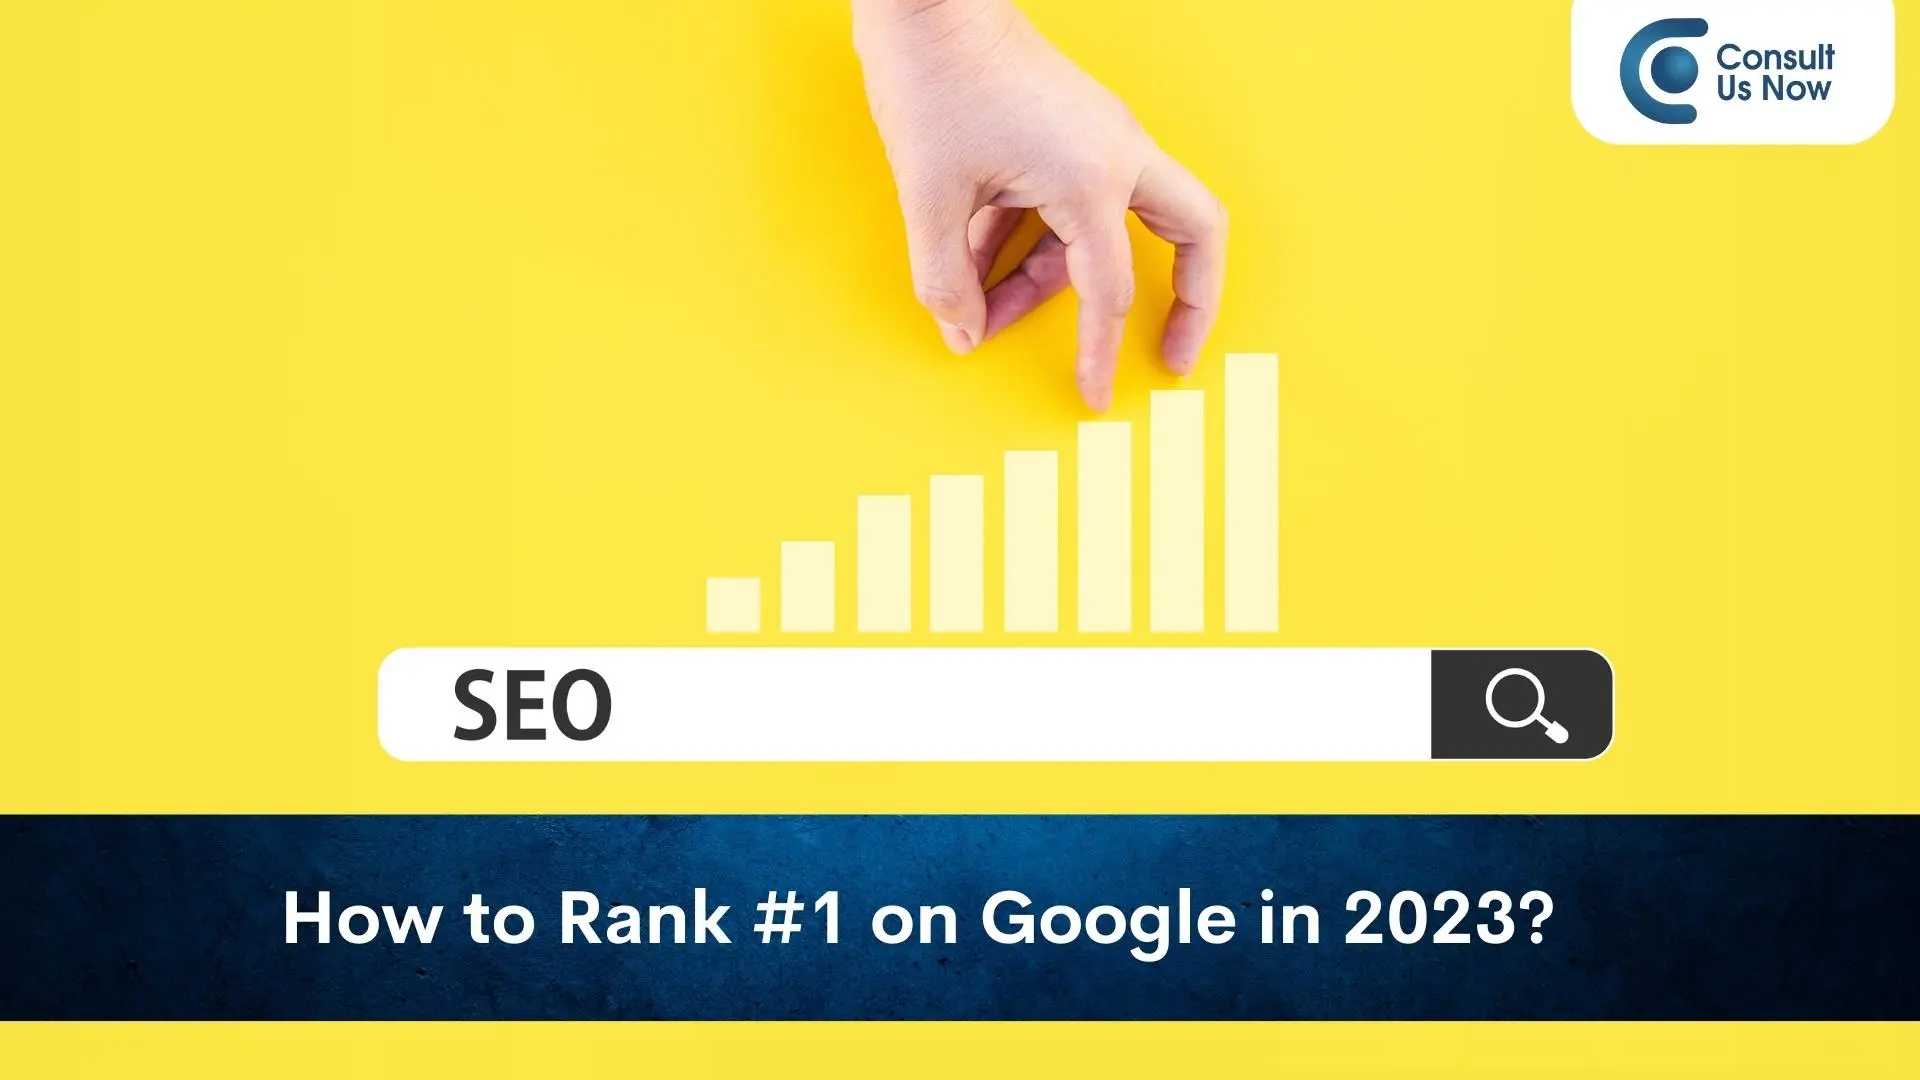 How to rank on Google in 2023?